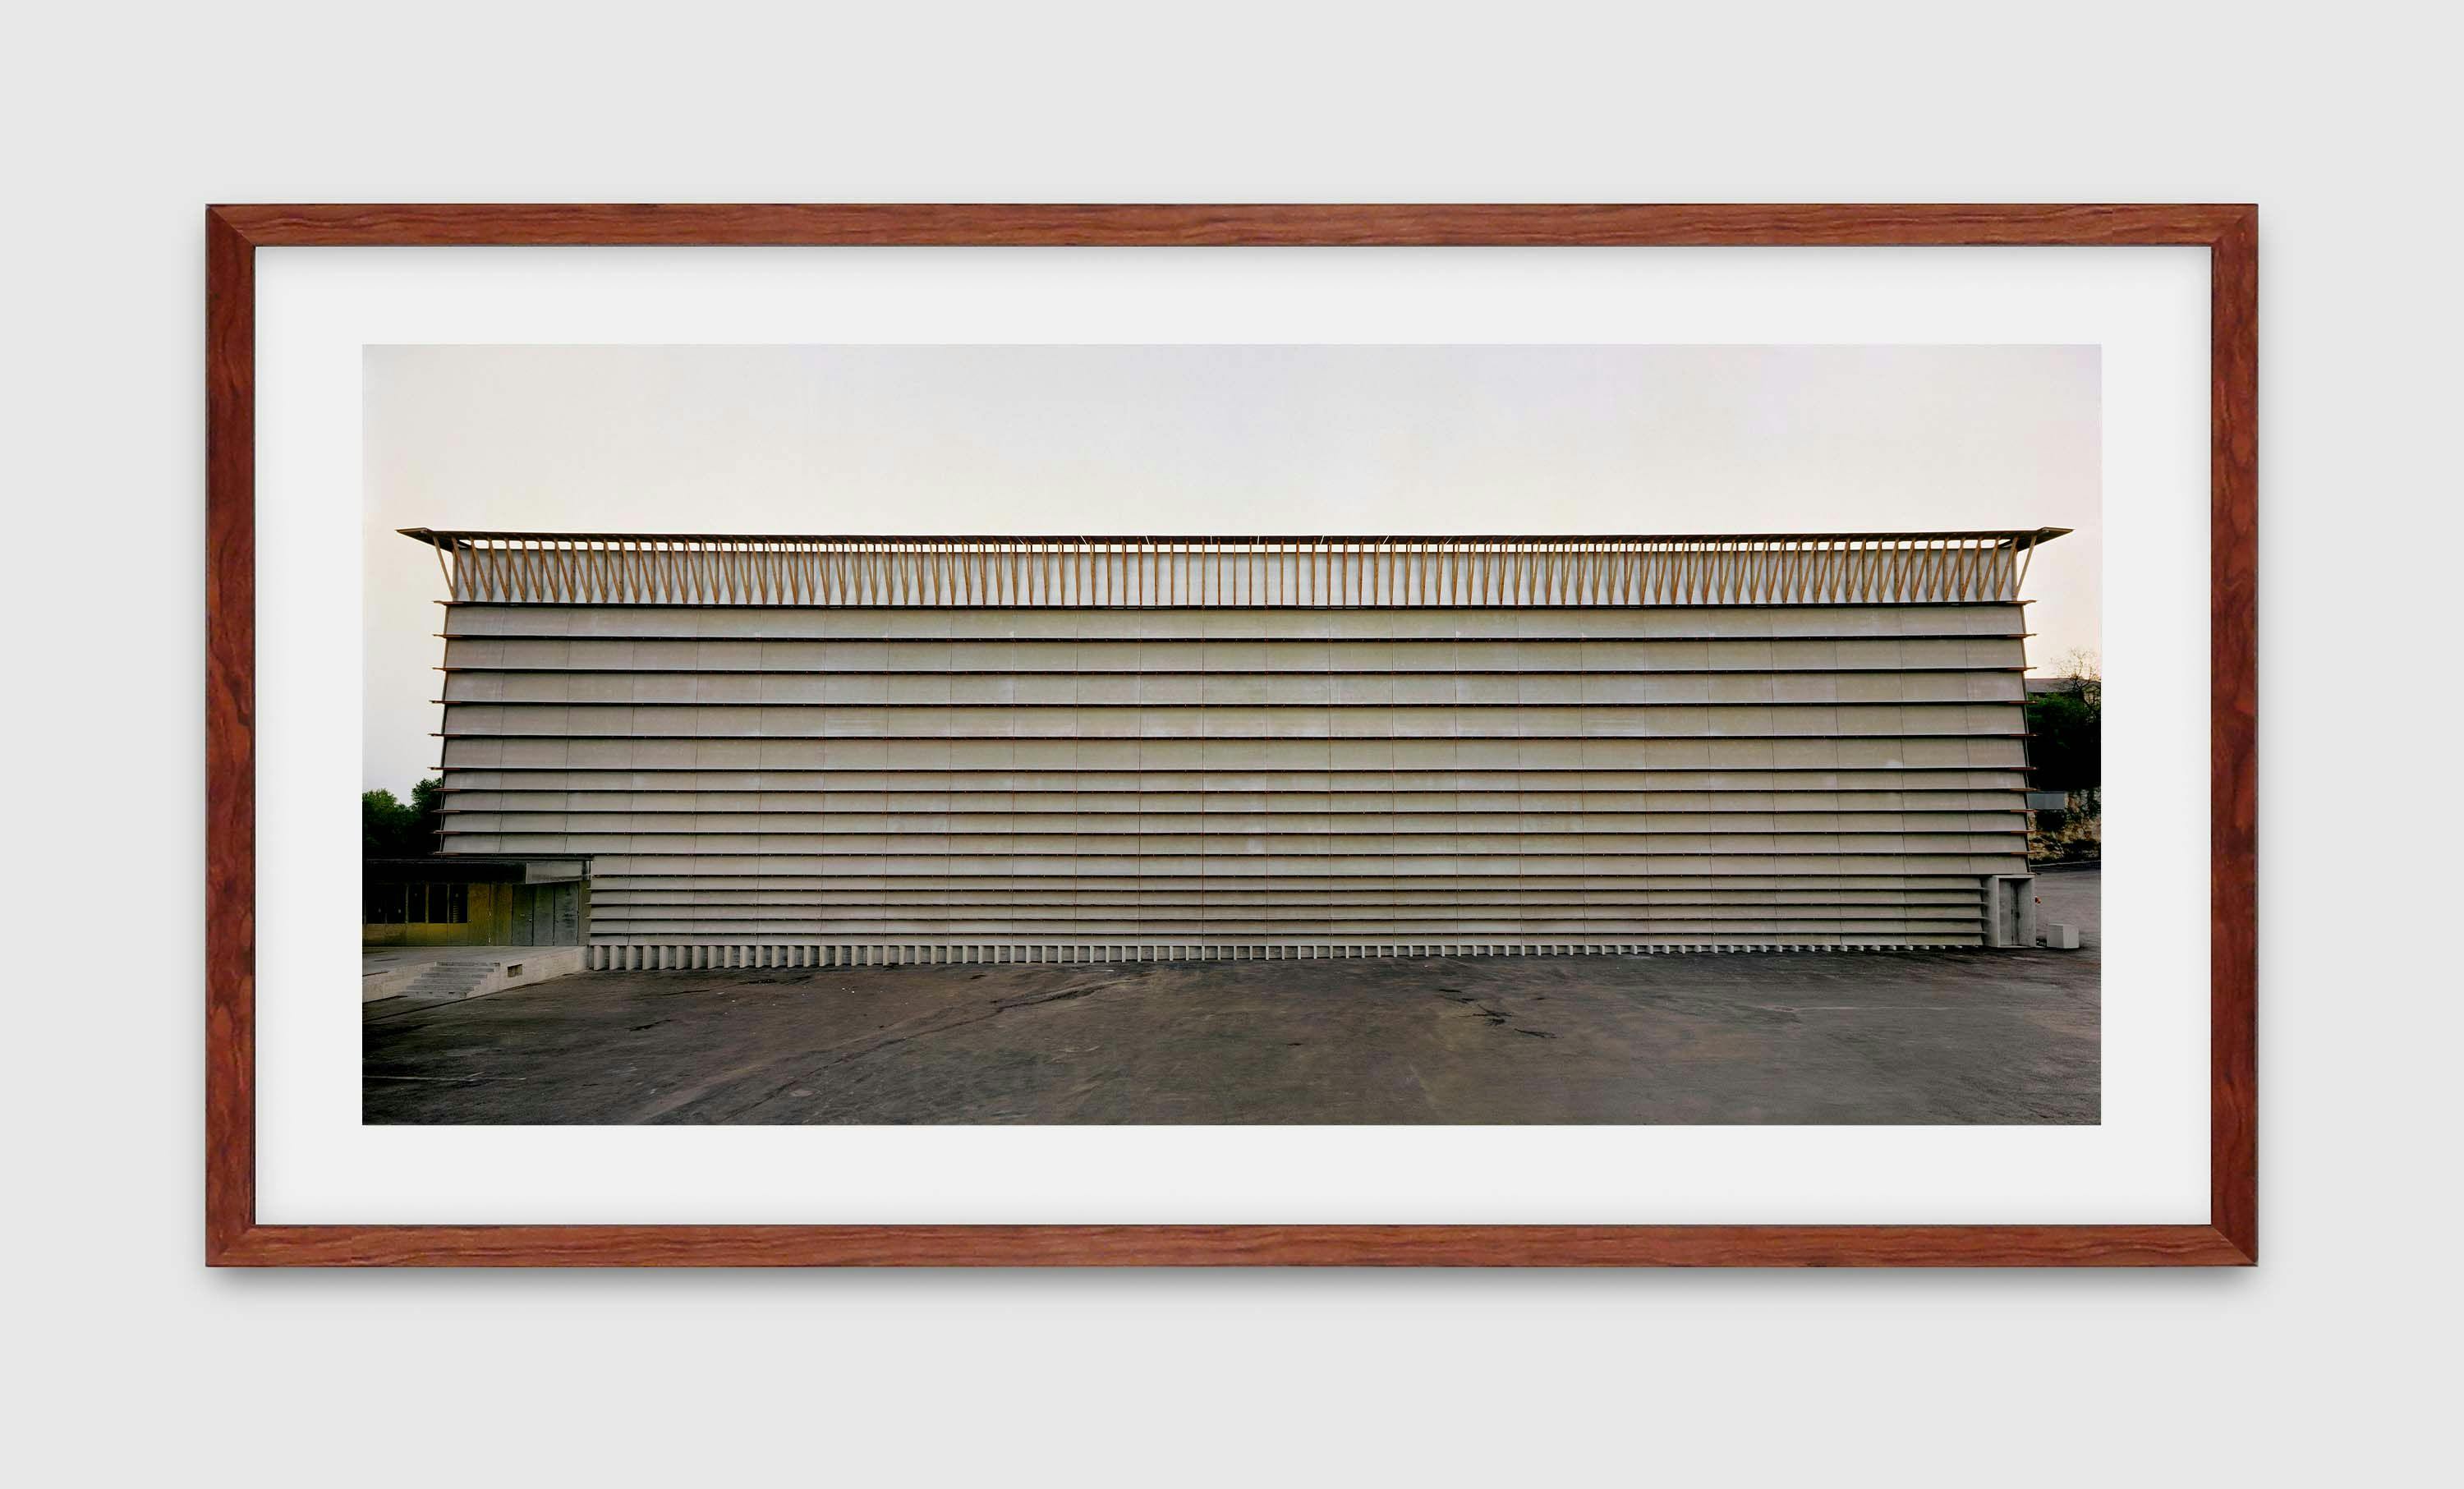 A photograph by Thomas Ruff, titled Haus Nr. 4 II (Ricola Laufen), dated 1991.